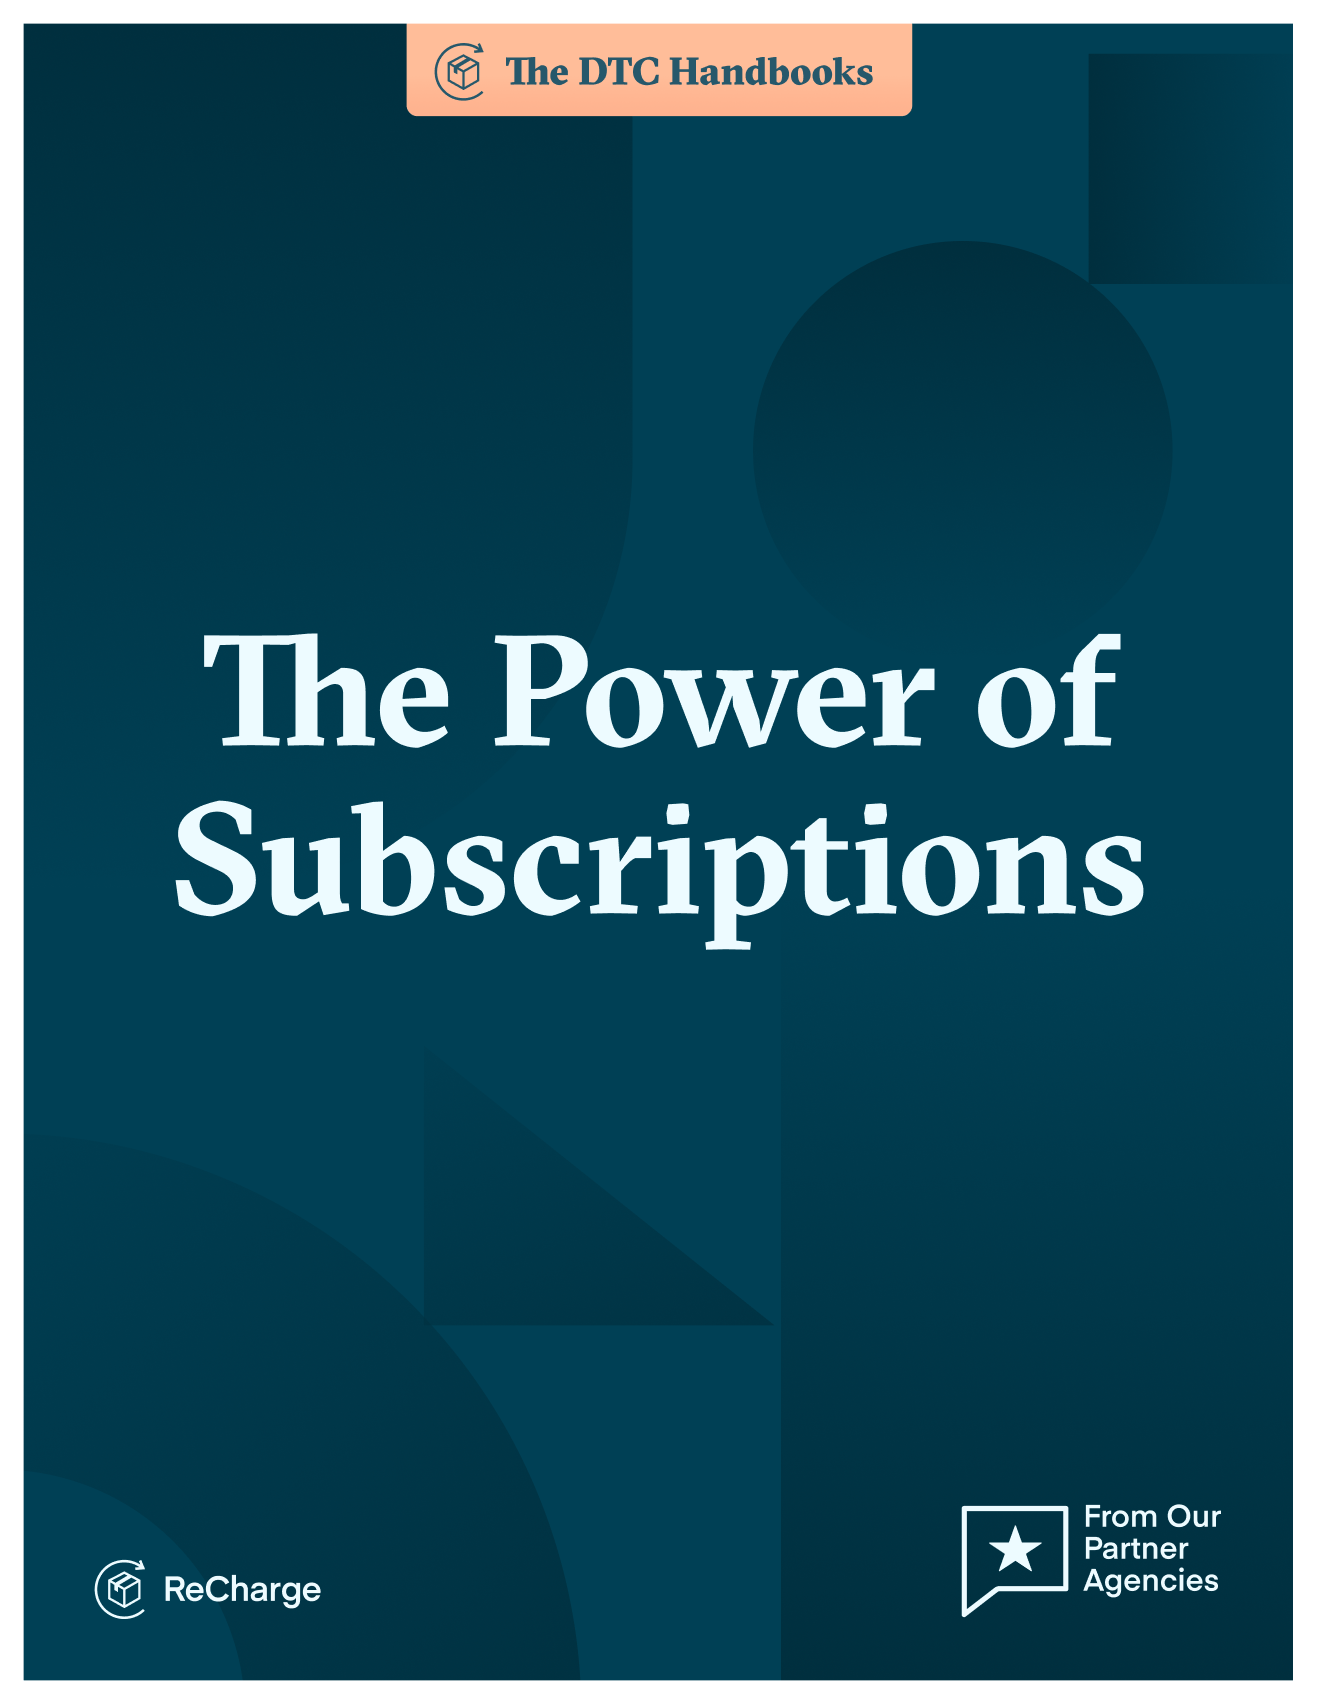 The Power of Subscriptions